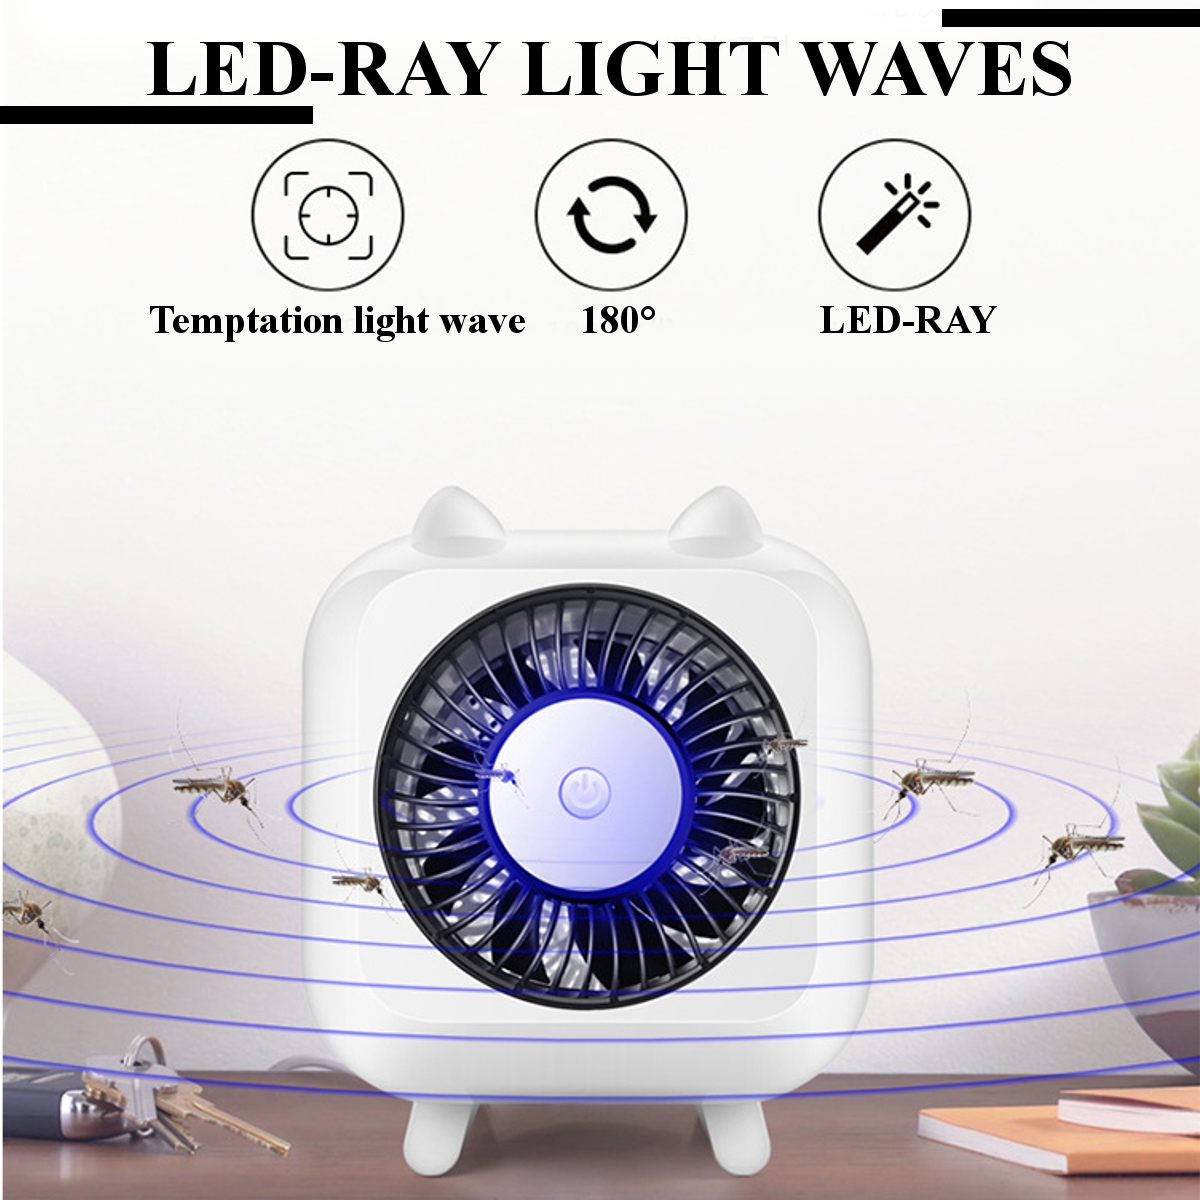 Electric-Photocatalyst-LED-Mosquito-Trapping-Catcher-Lamp-Insect-killer-Trap-Light-1533647-3